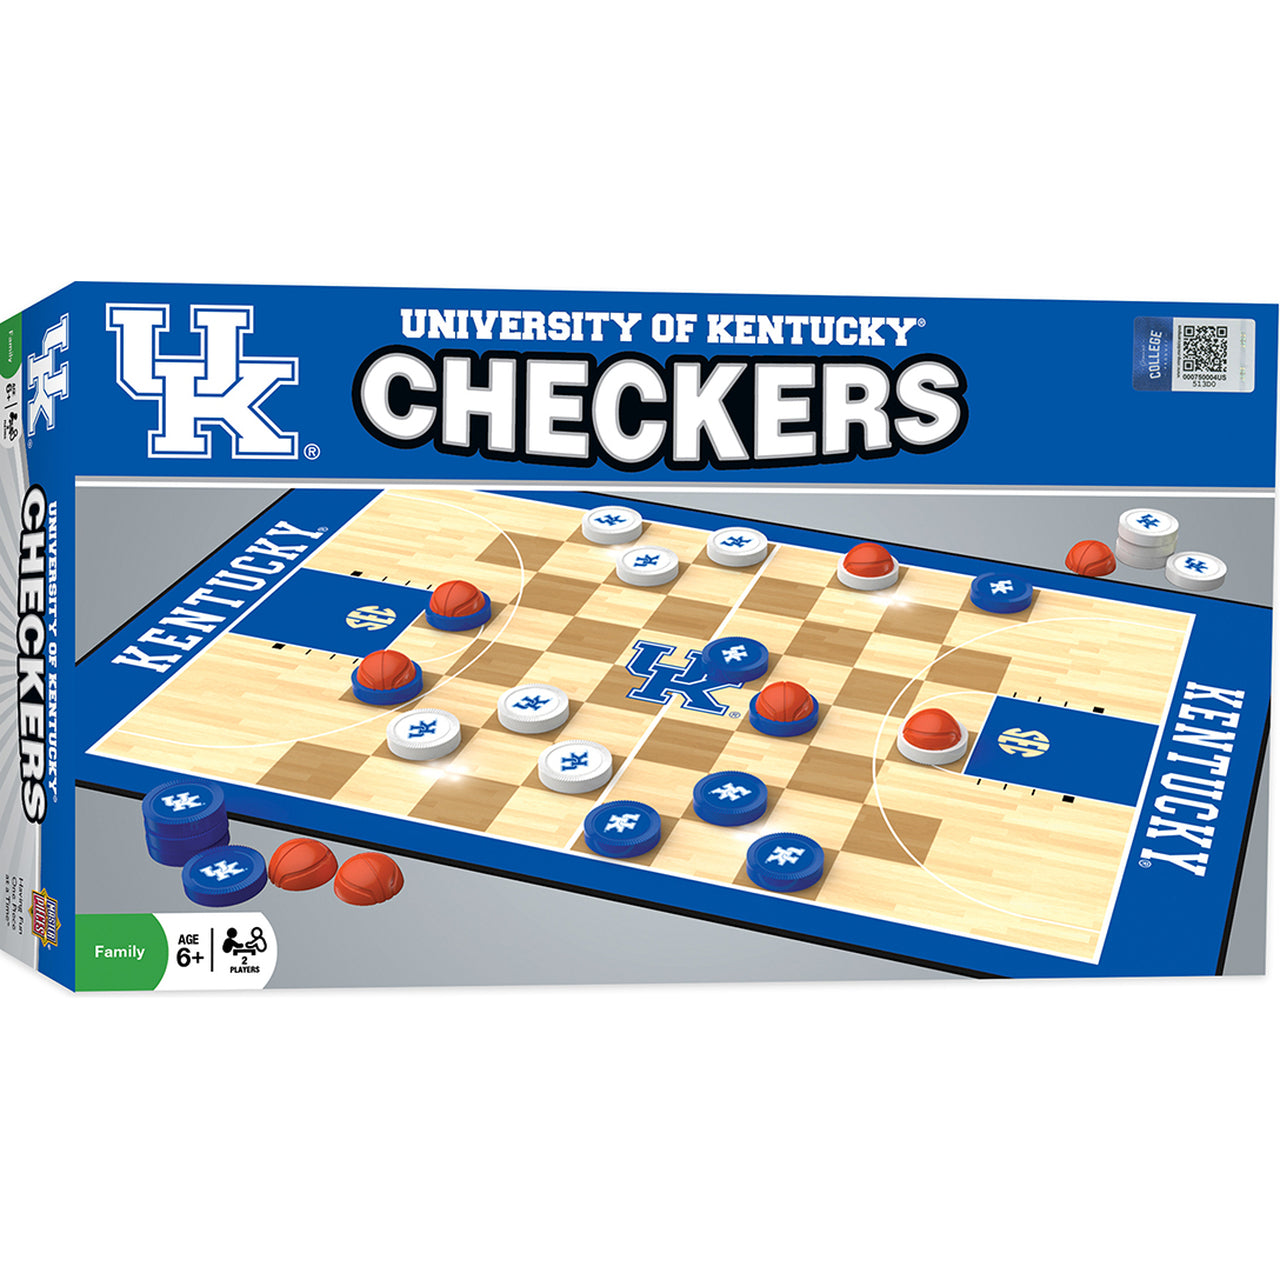 Kentucky Wildcats NCAA Checkers Board Game: Classic checkers with football helmet kings. 2 players, ages 6+. Officially licensed.